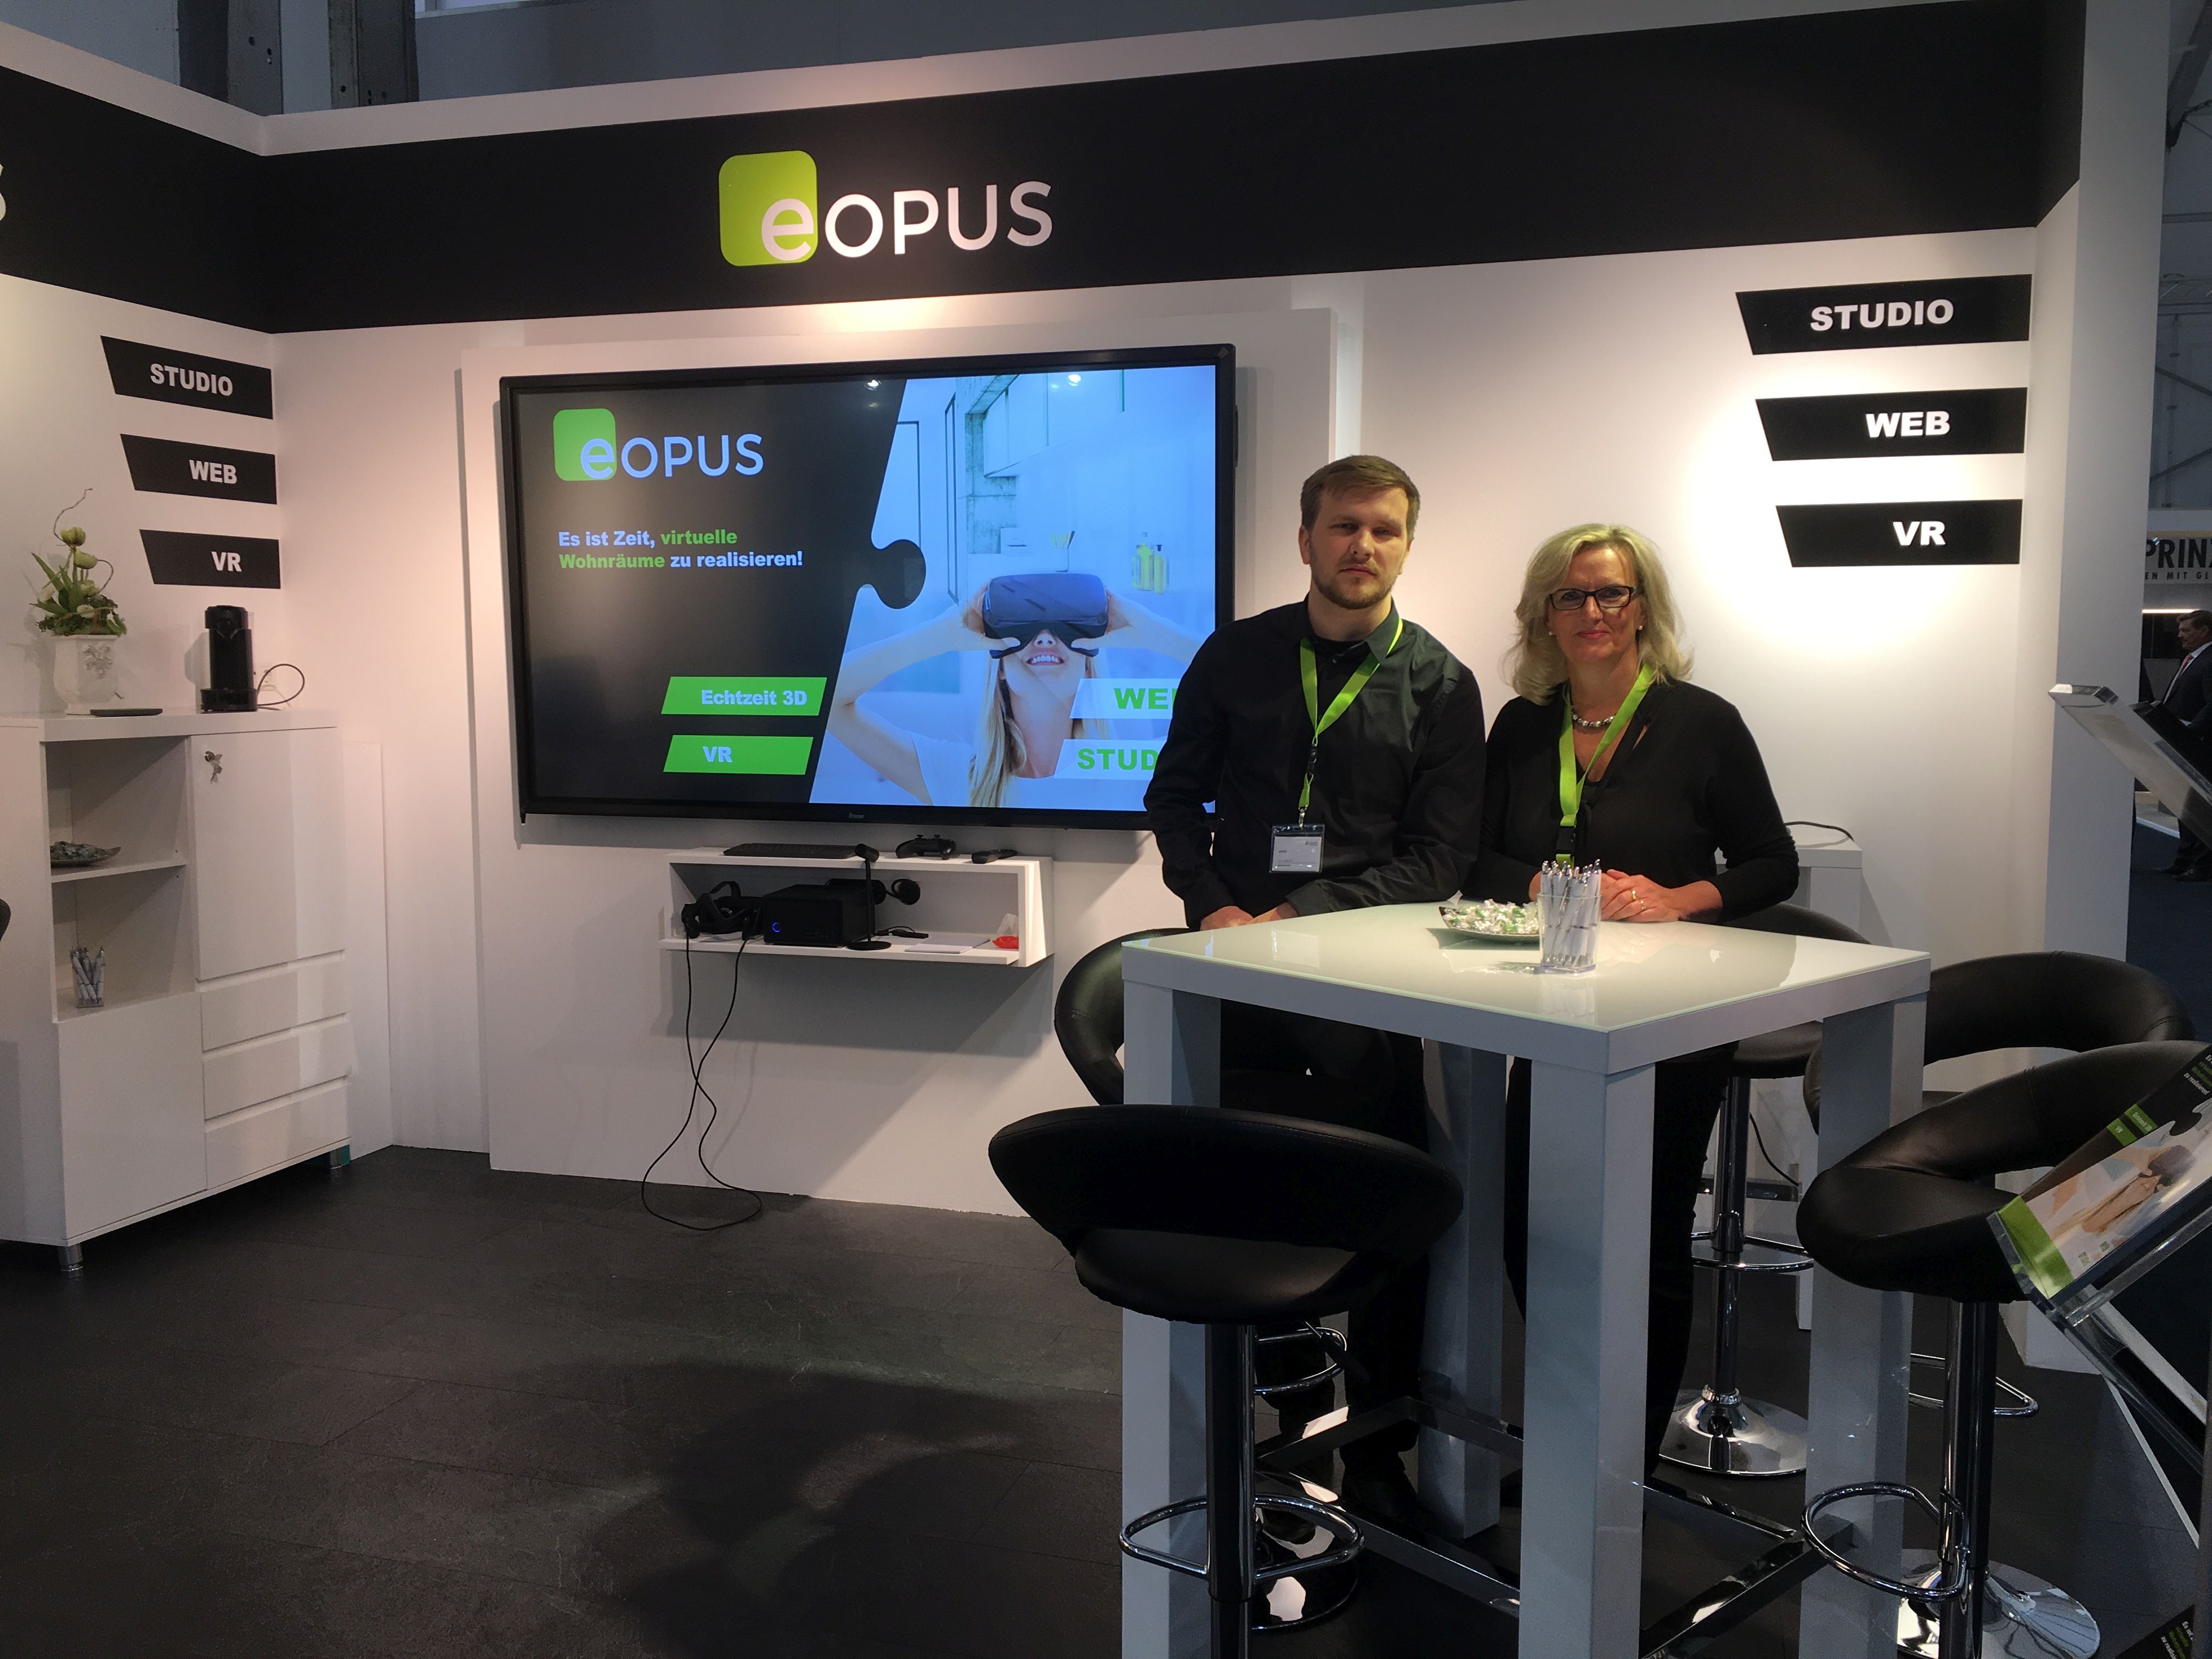 eOPUS shows impressive new features at the area30 in Löhne